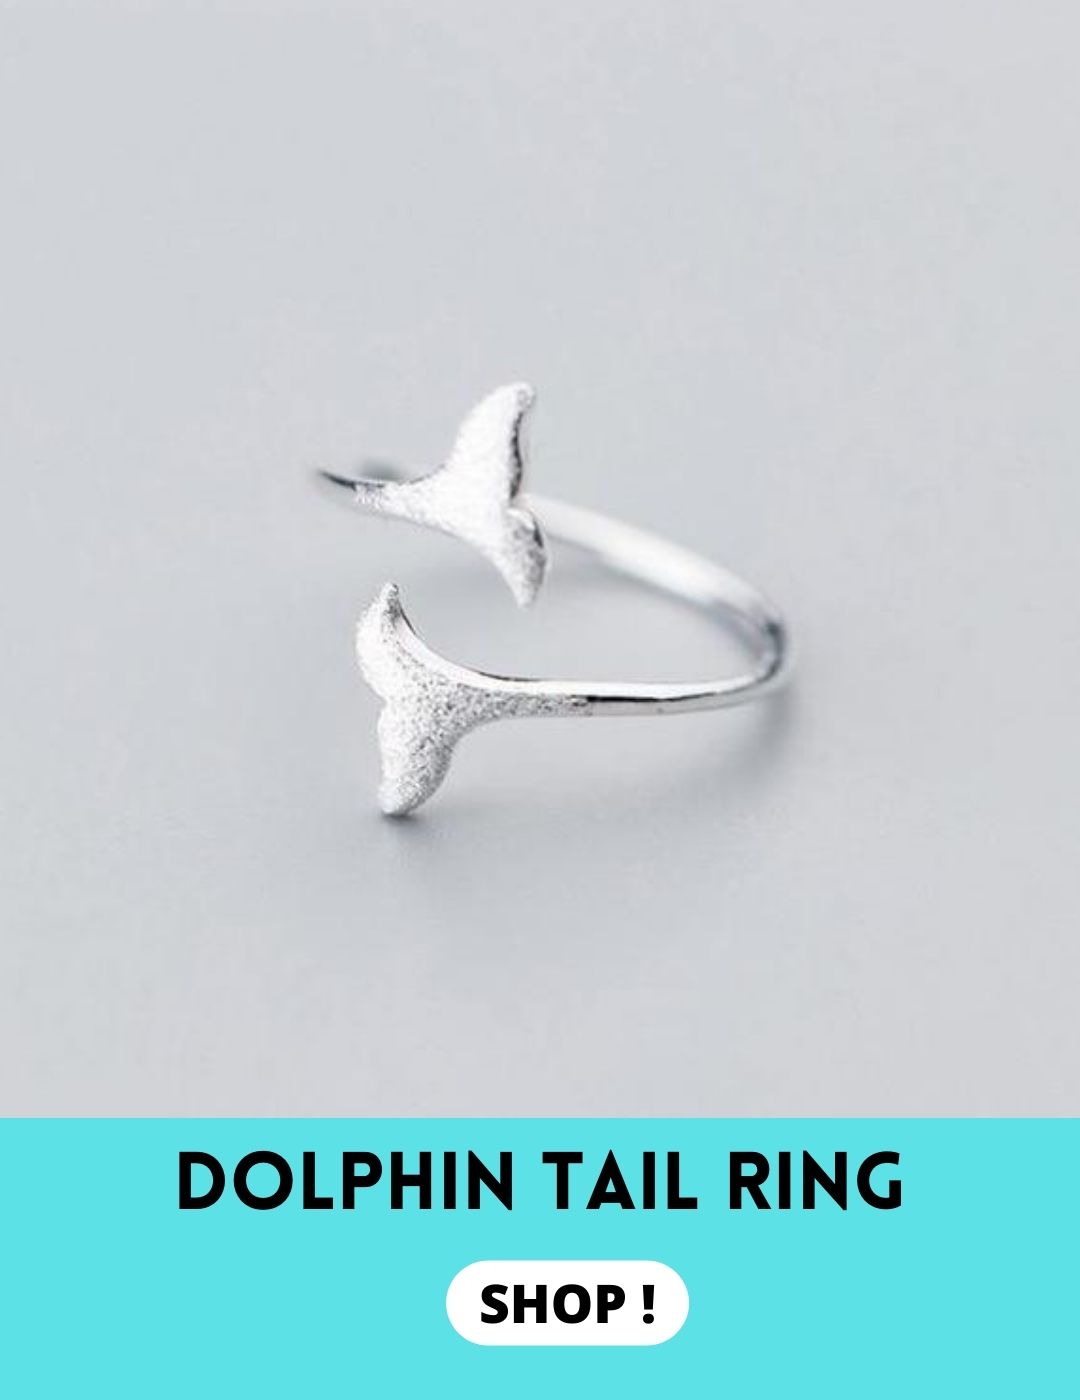 Meaning of dolphin symbolism